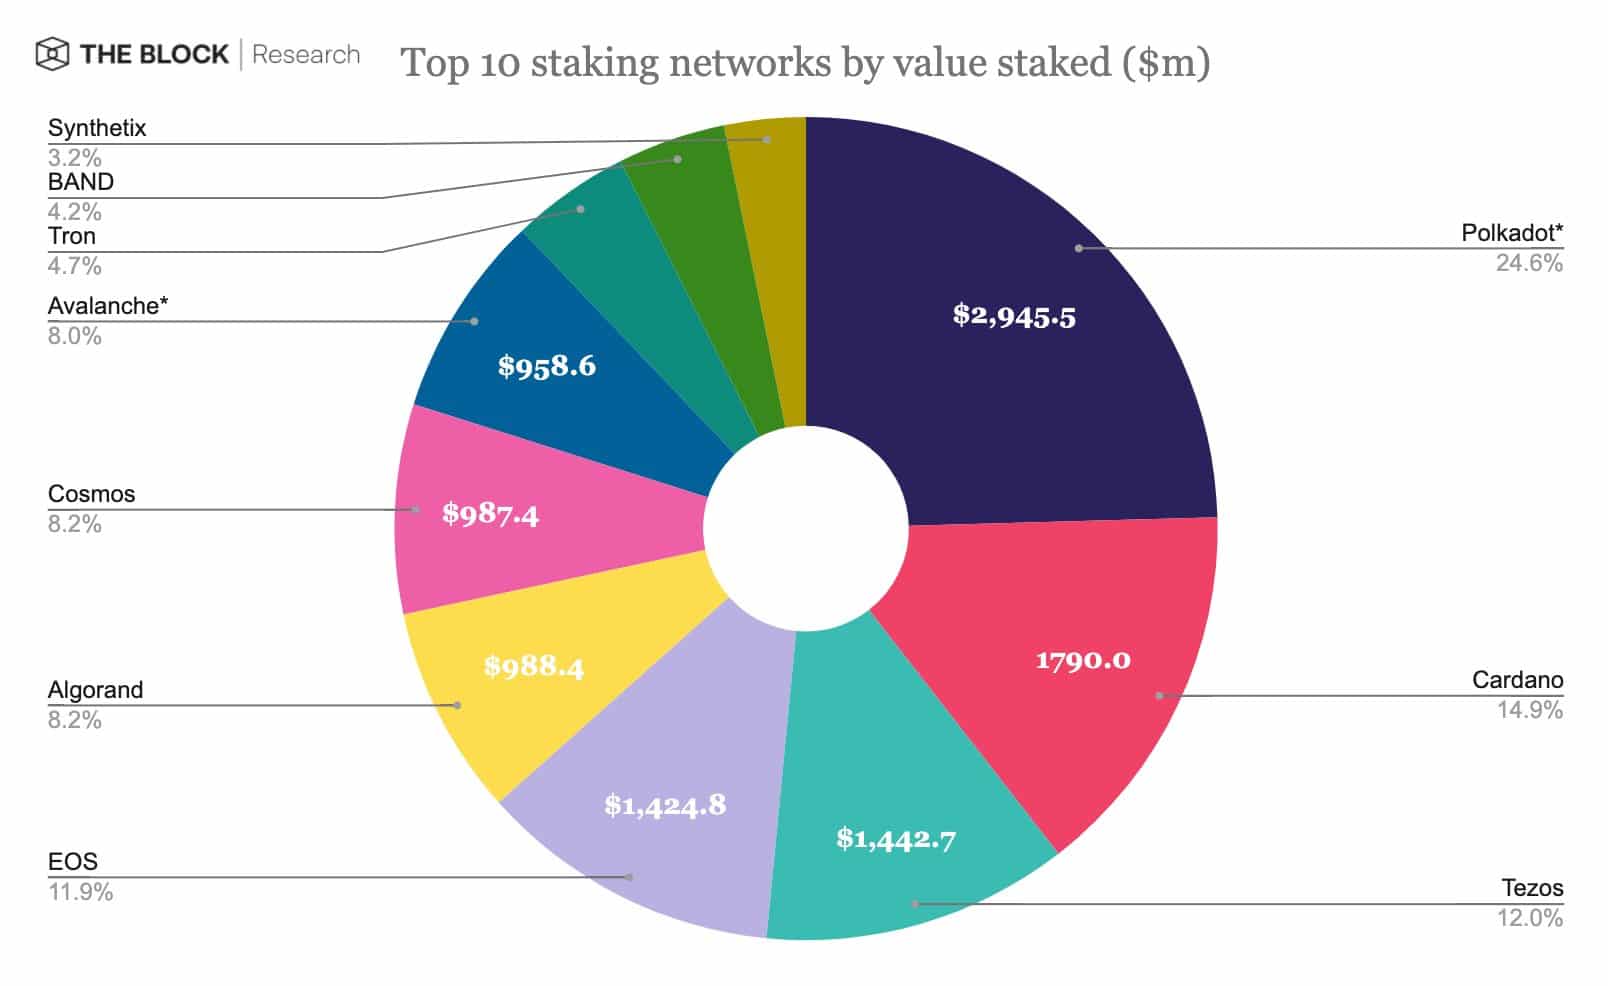 Polkadot ranks first for staking value